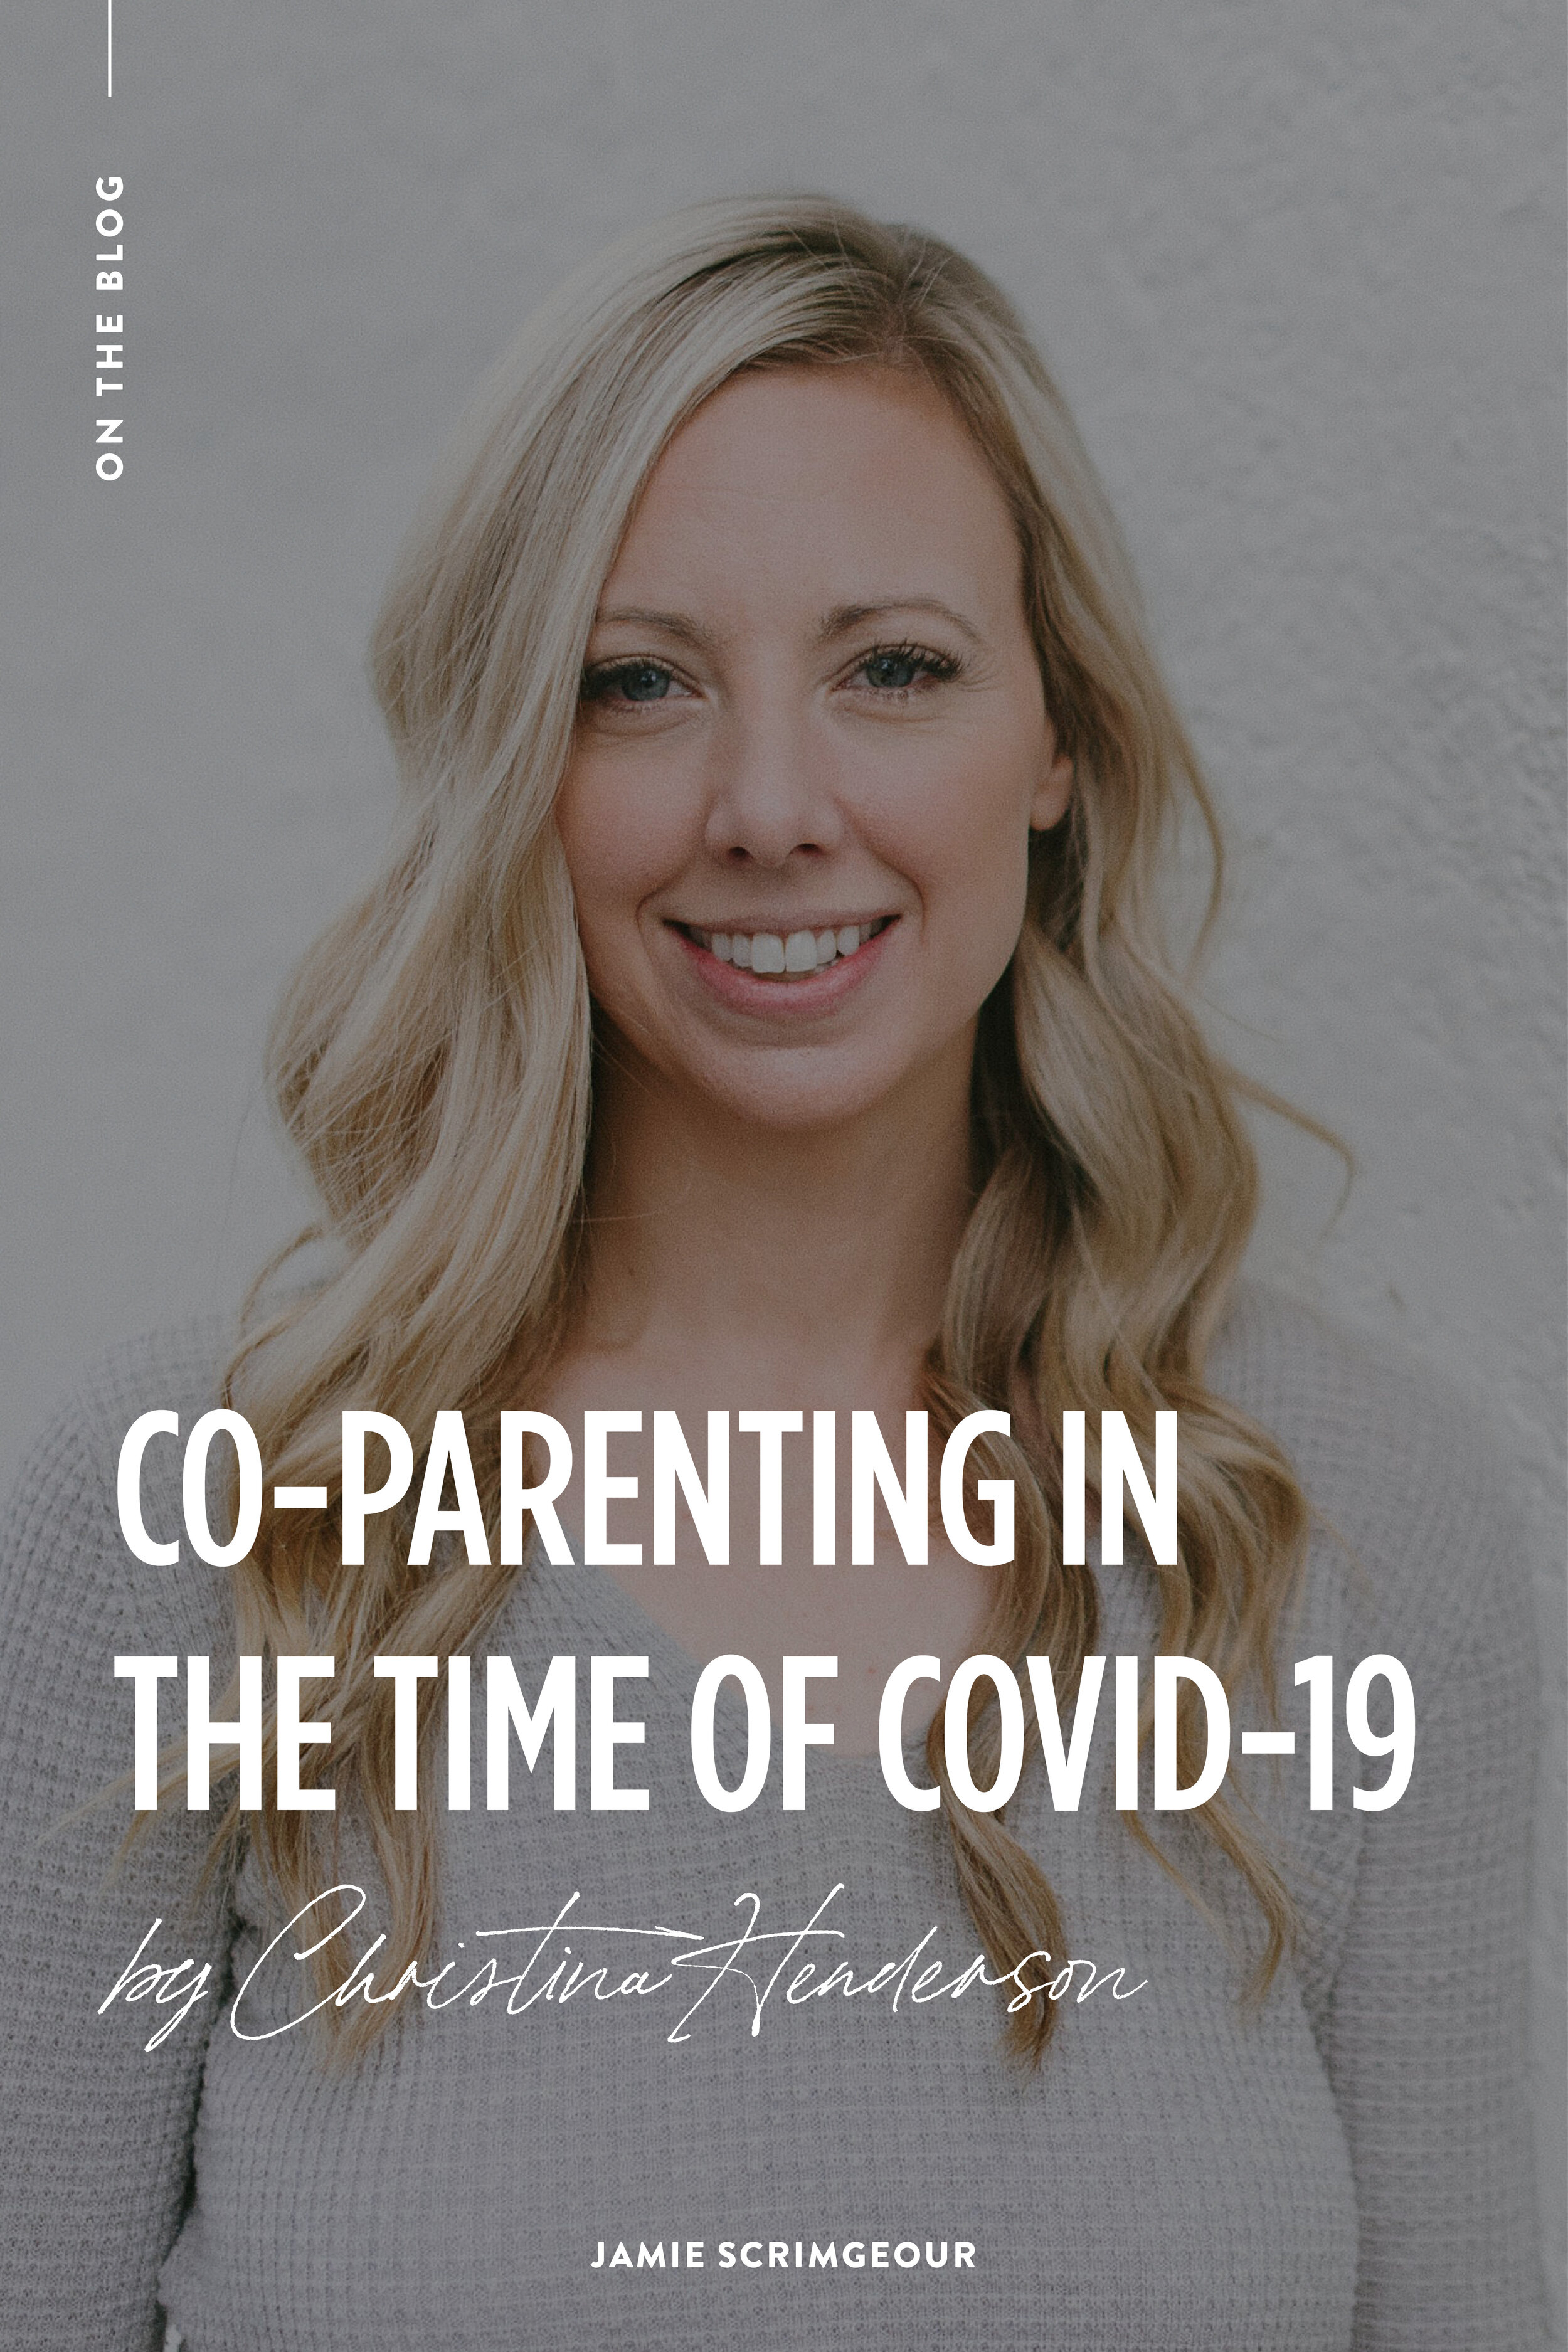 Jamie Scrimgeour: Stepmom Support - Co-Parenting In The Time Of Covid-19